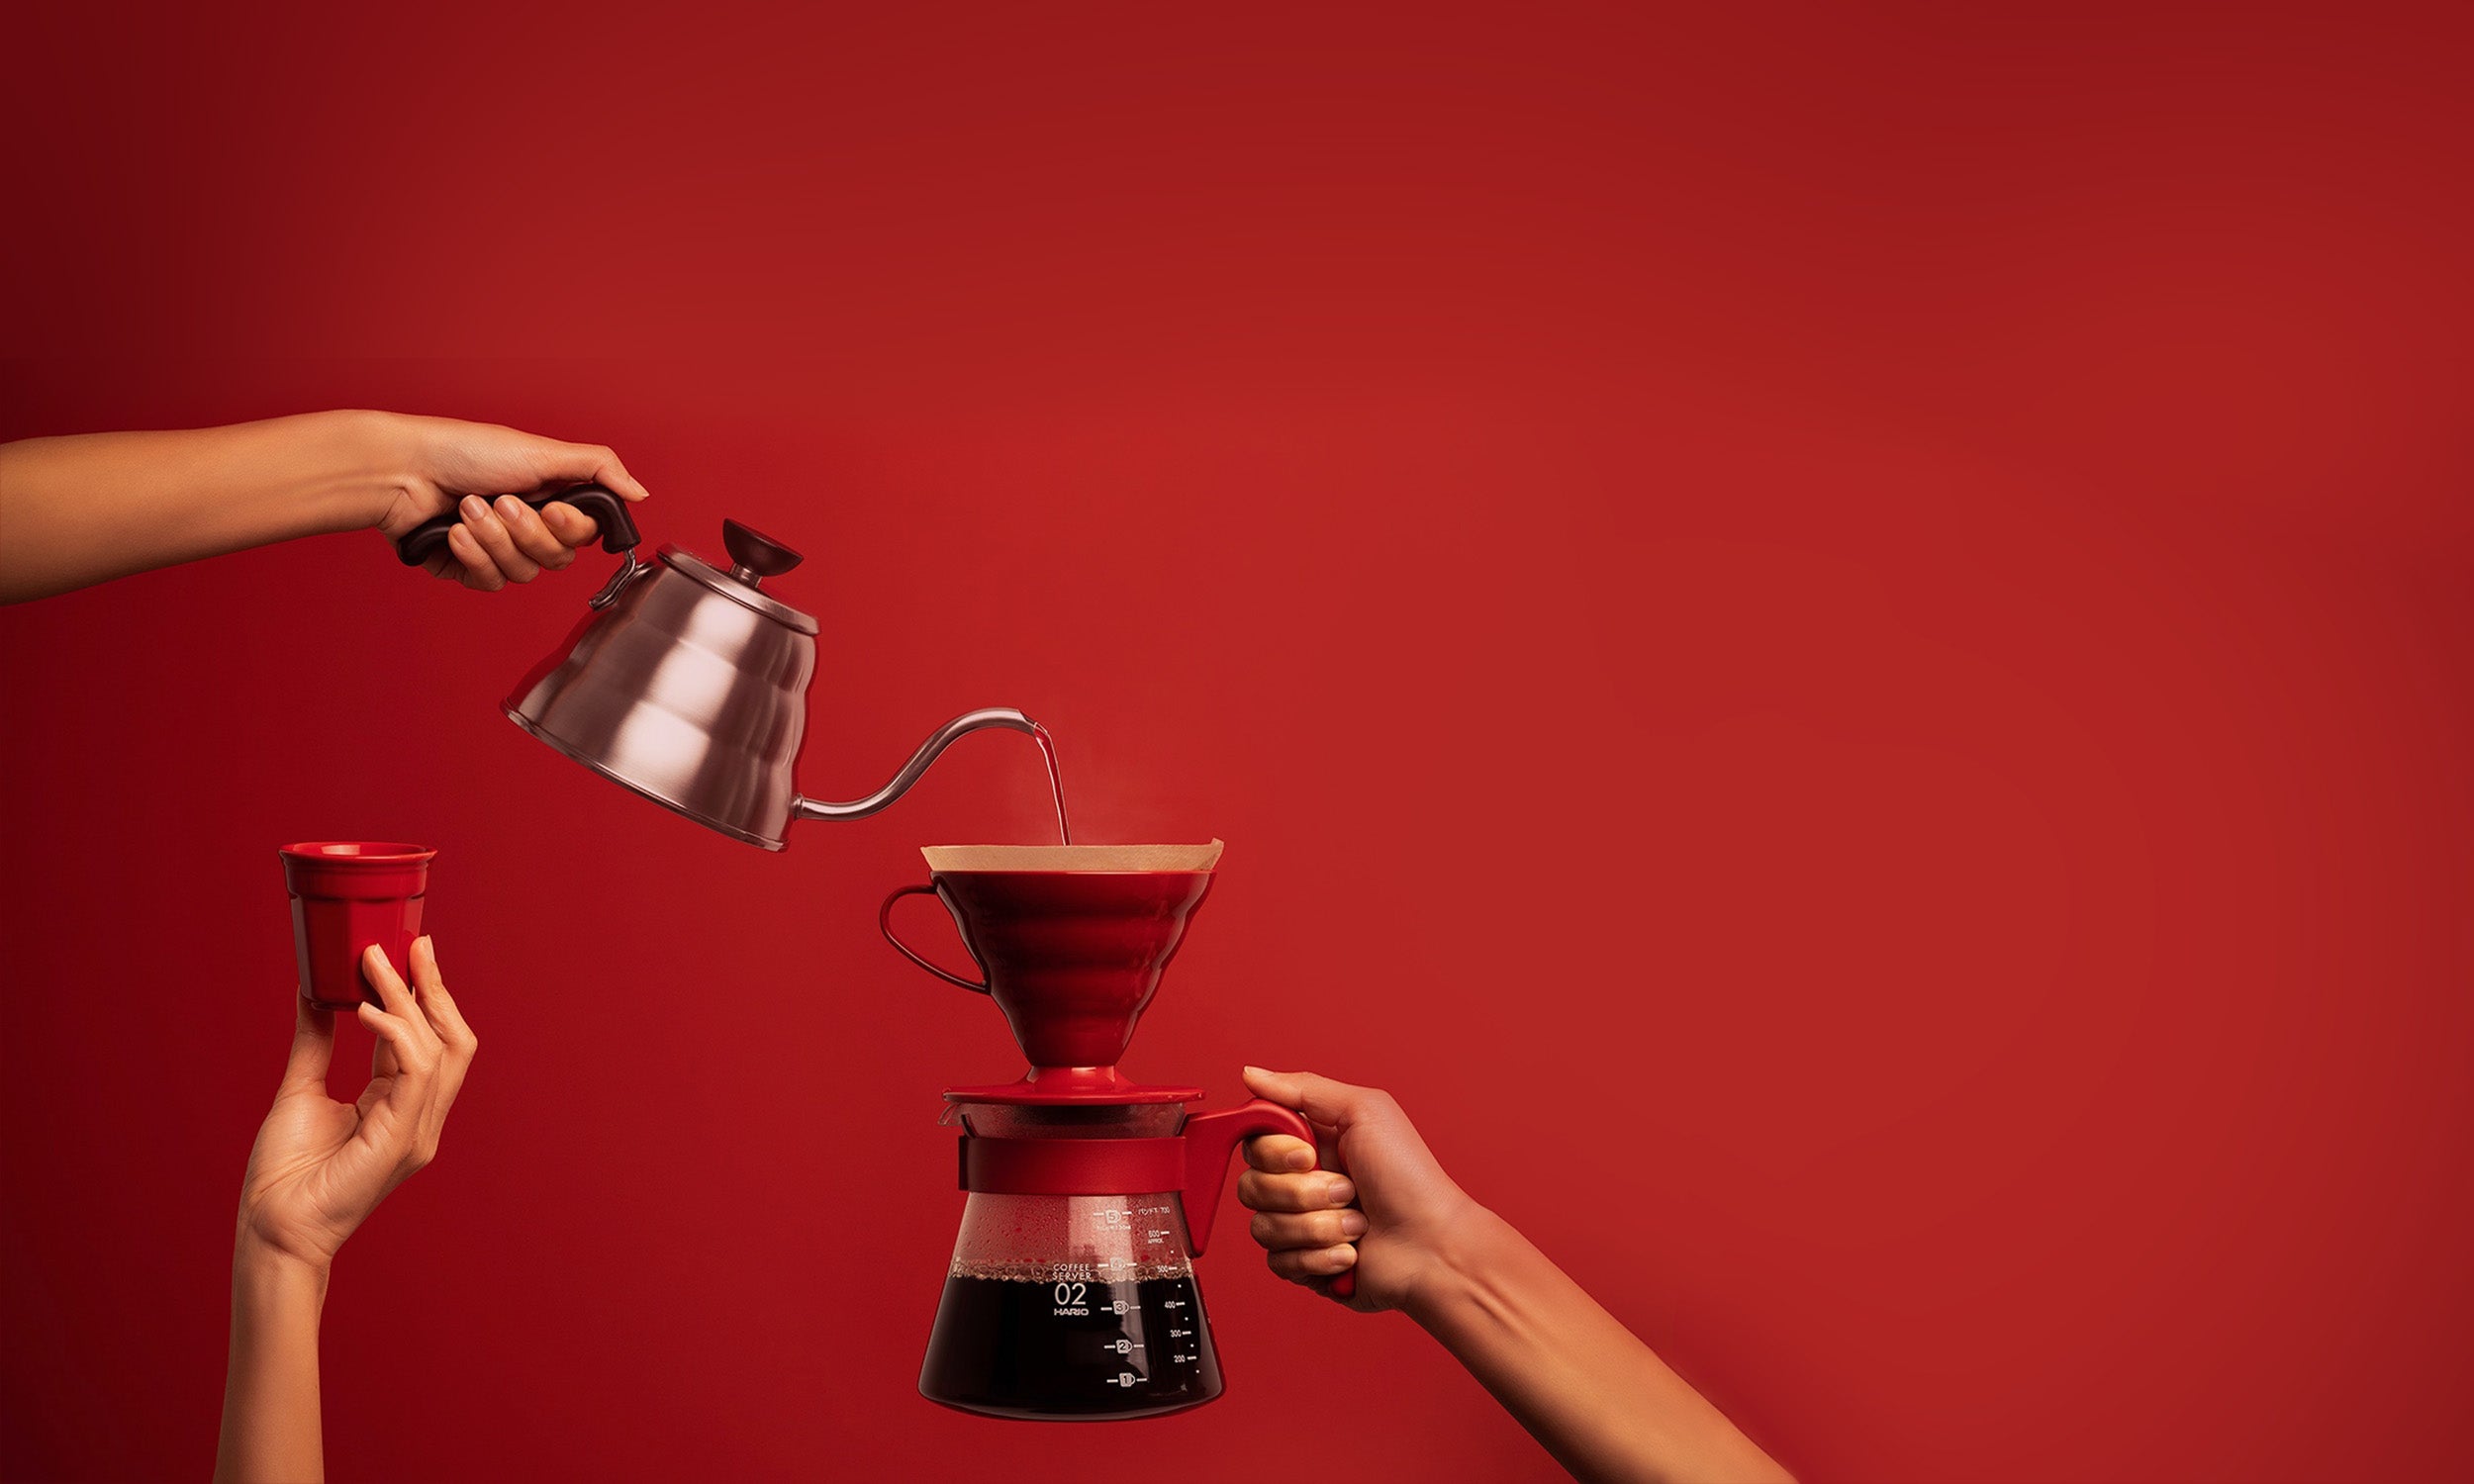 Image of hands brewing coffee in front of a red background.